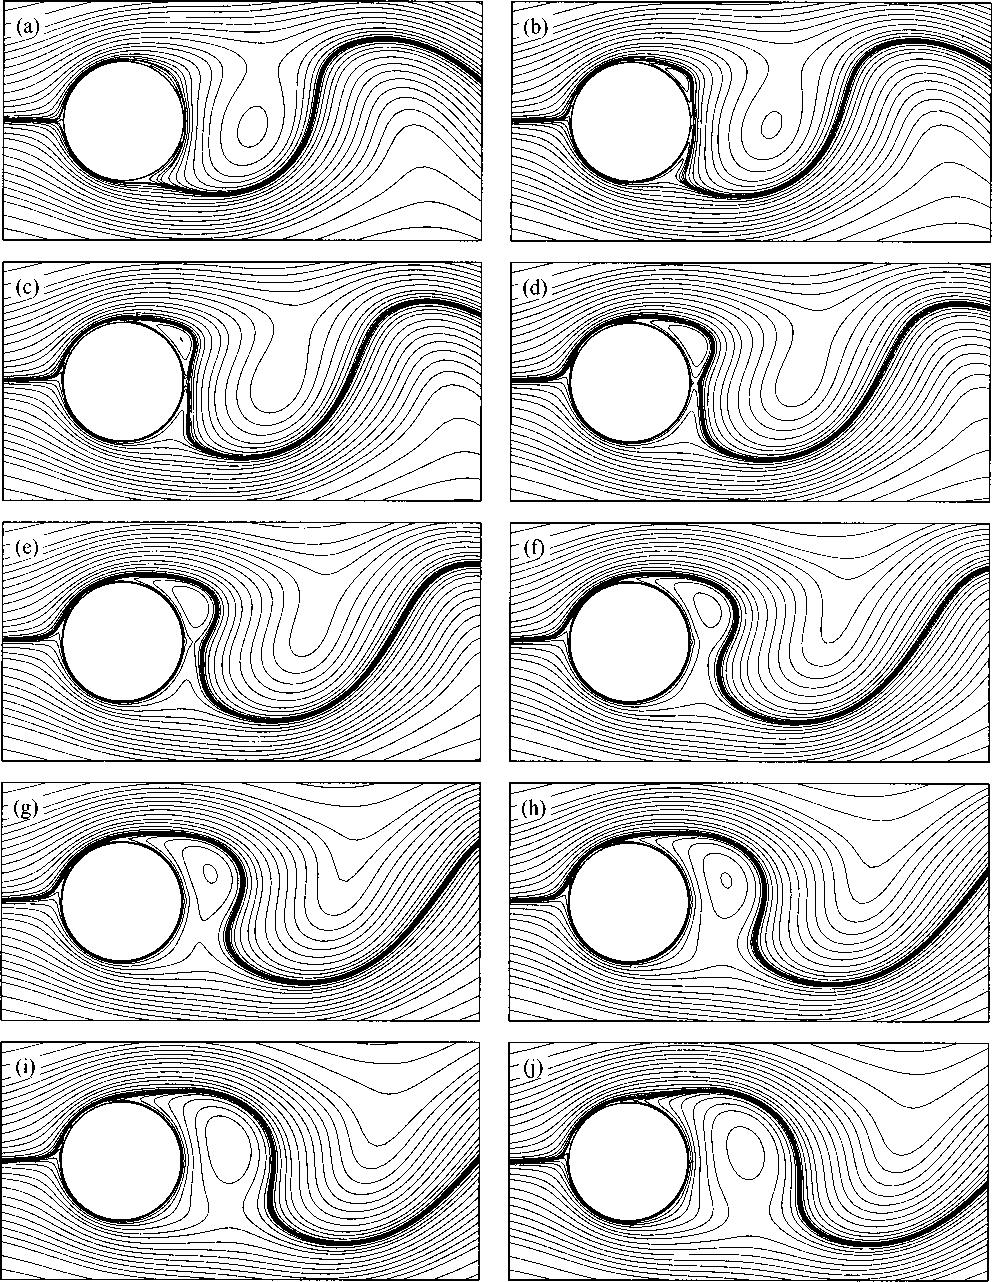 874 Phys. Fluids, Vol. 10, No. 4, April 1998 S.-J. Baek and H. J. Sung FIG. 11. Temporal evolutions of C L with respect to. a S f 0.140 and max 30, b S f 0.200 and max 30. FIG. 9.